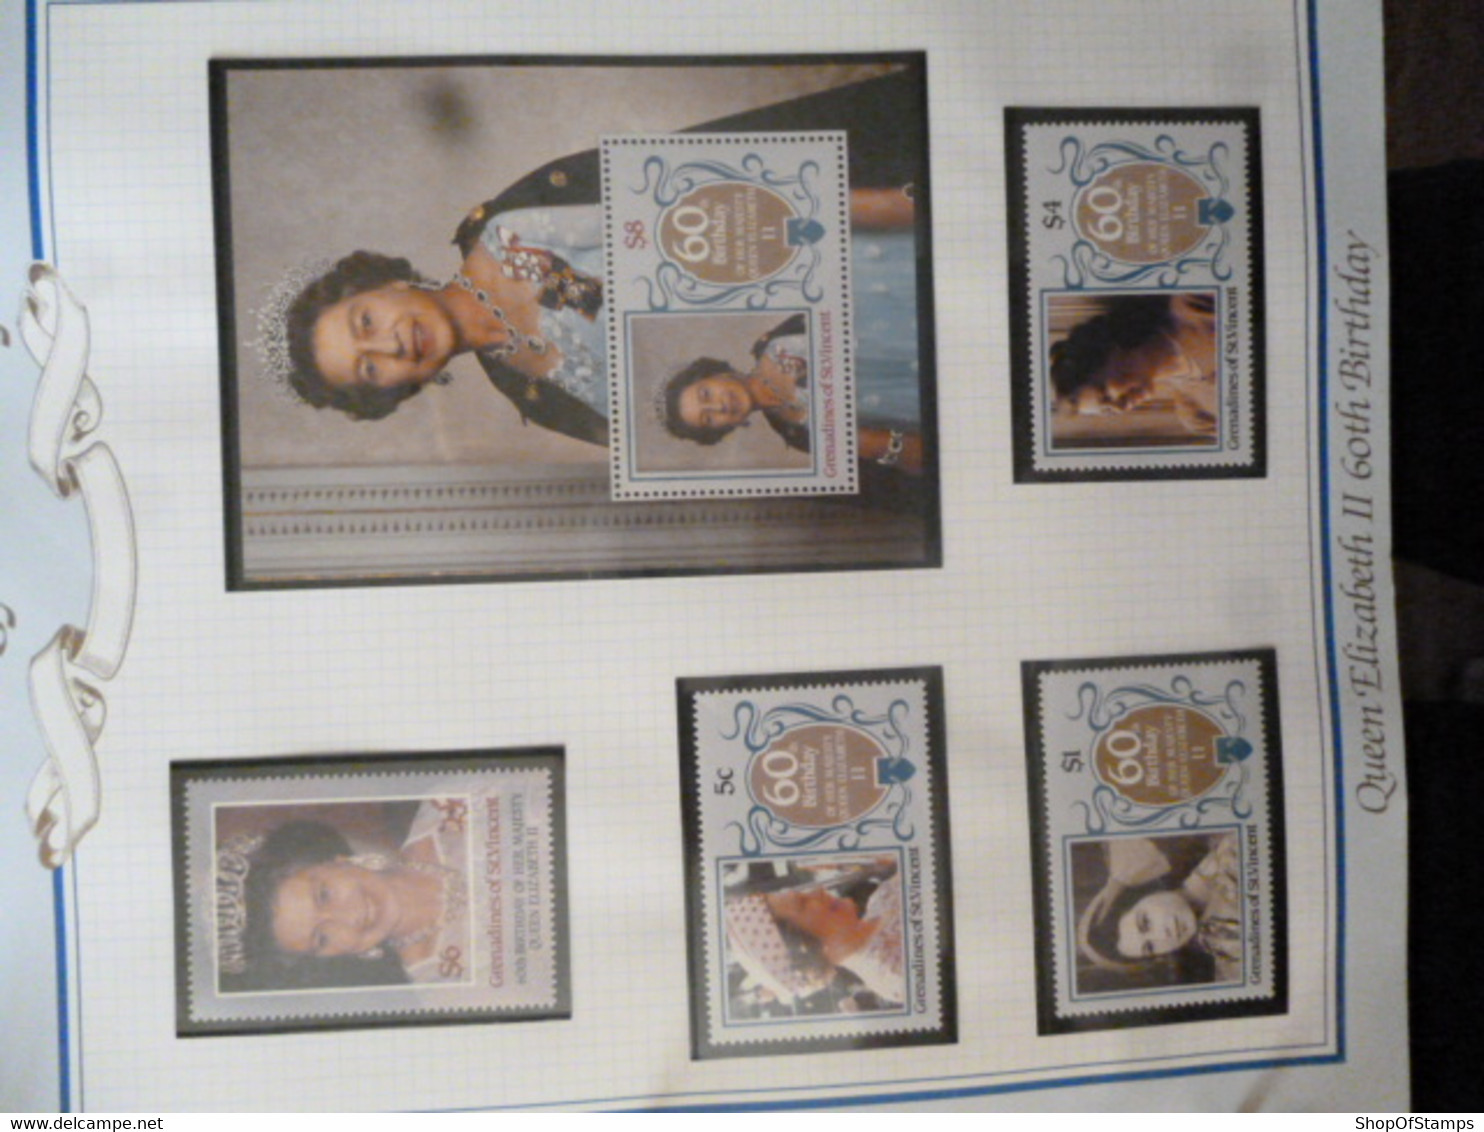 ST VICENT & GRENADINES MINT STAMPS/SHEETS QUEEN II 60th BIRTHDAY AS PER SCAN - Ploufragan